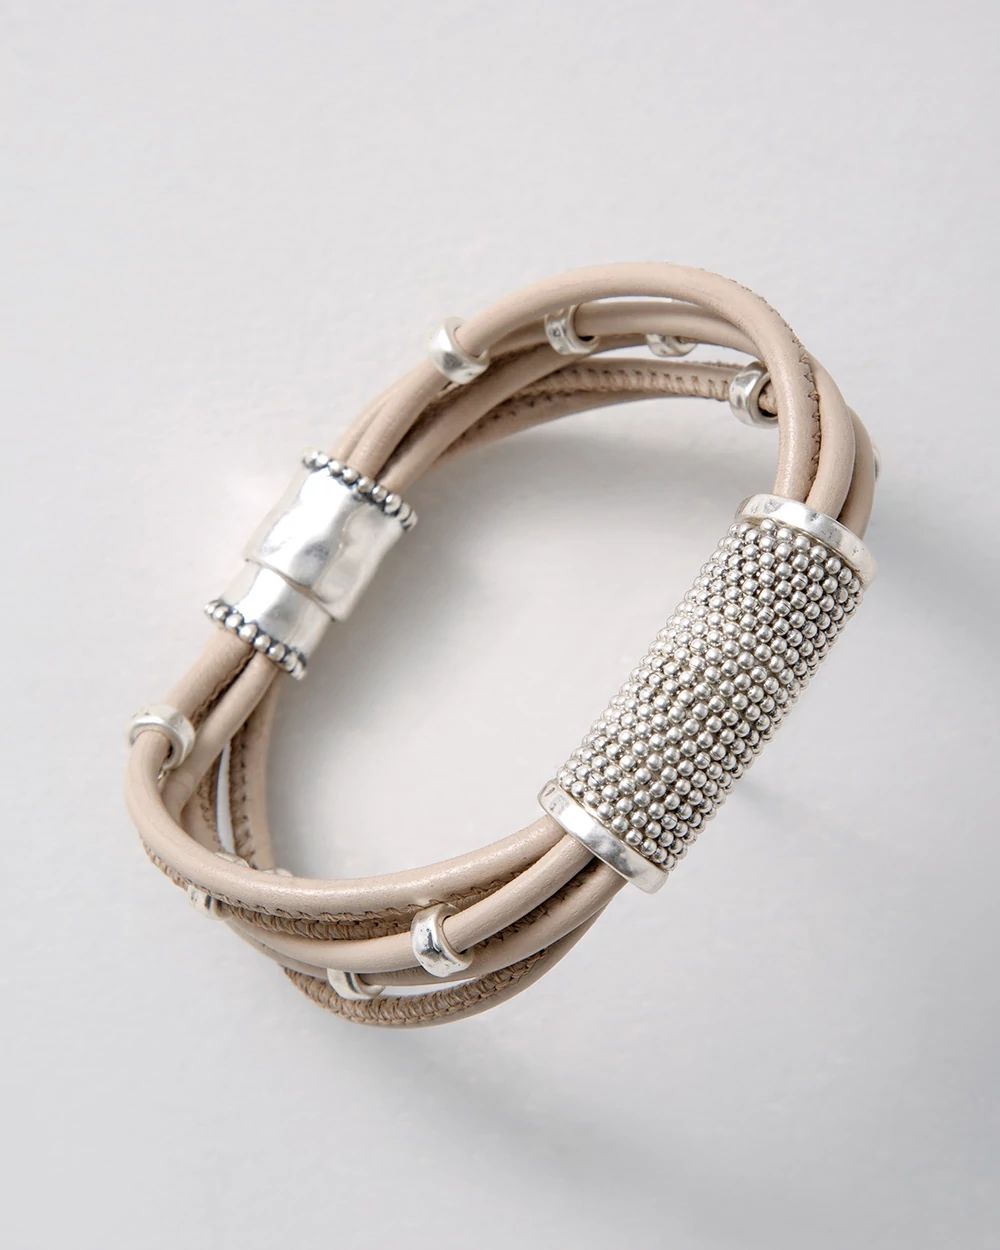 Silvertone Leather Bracelet click to view larger image.